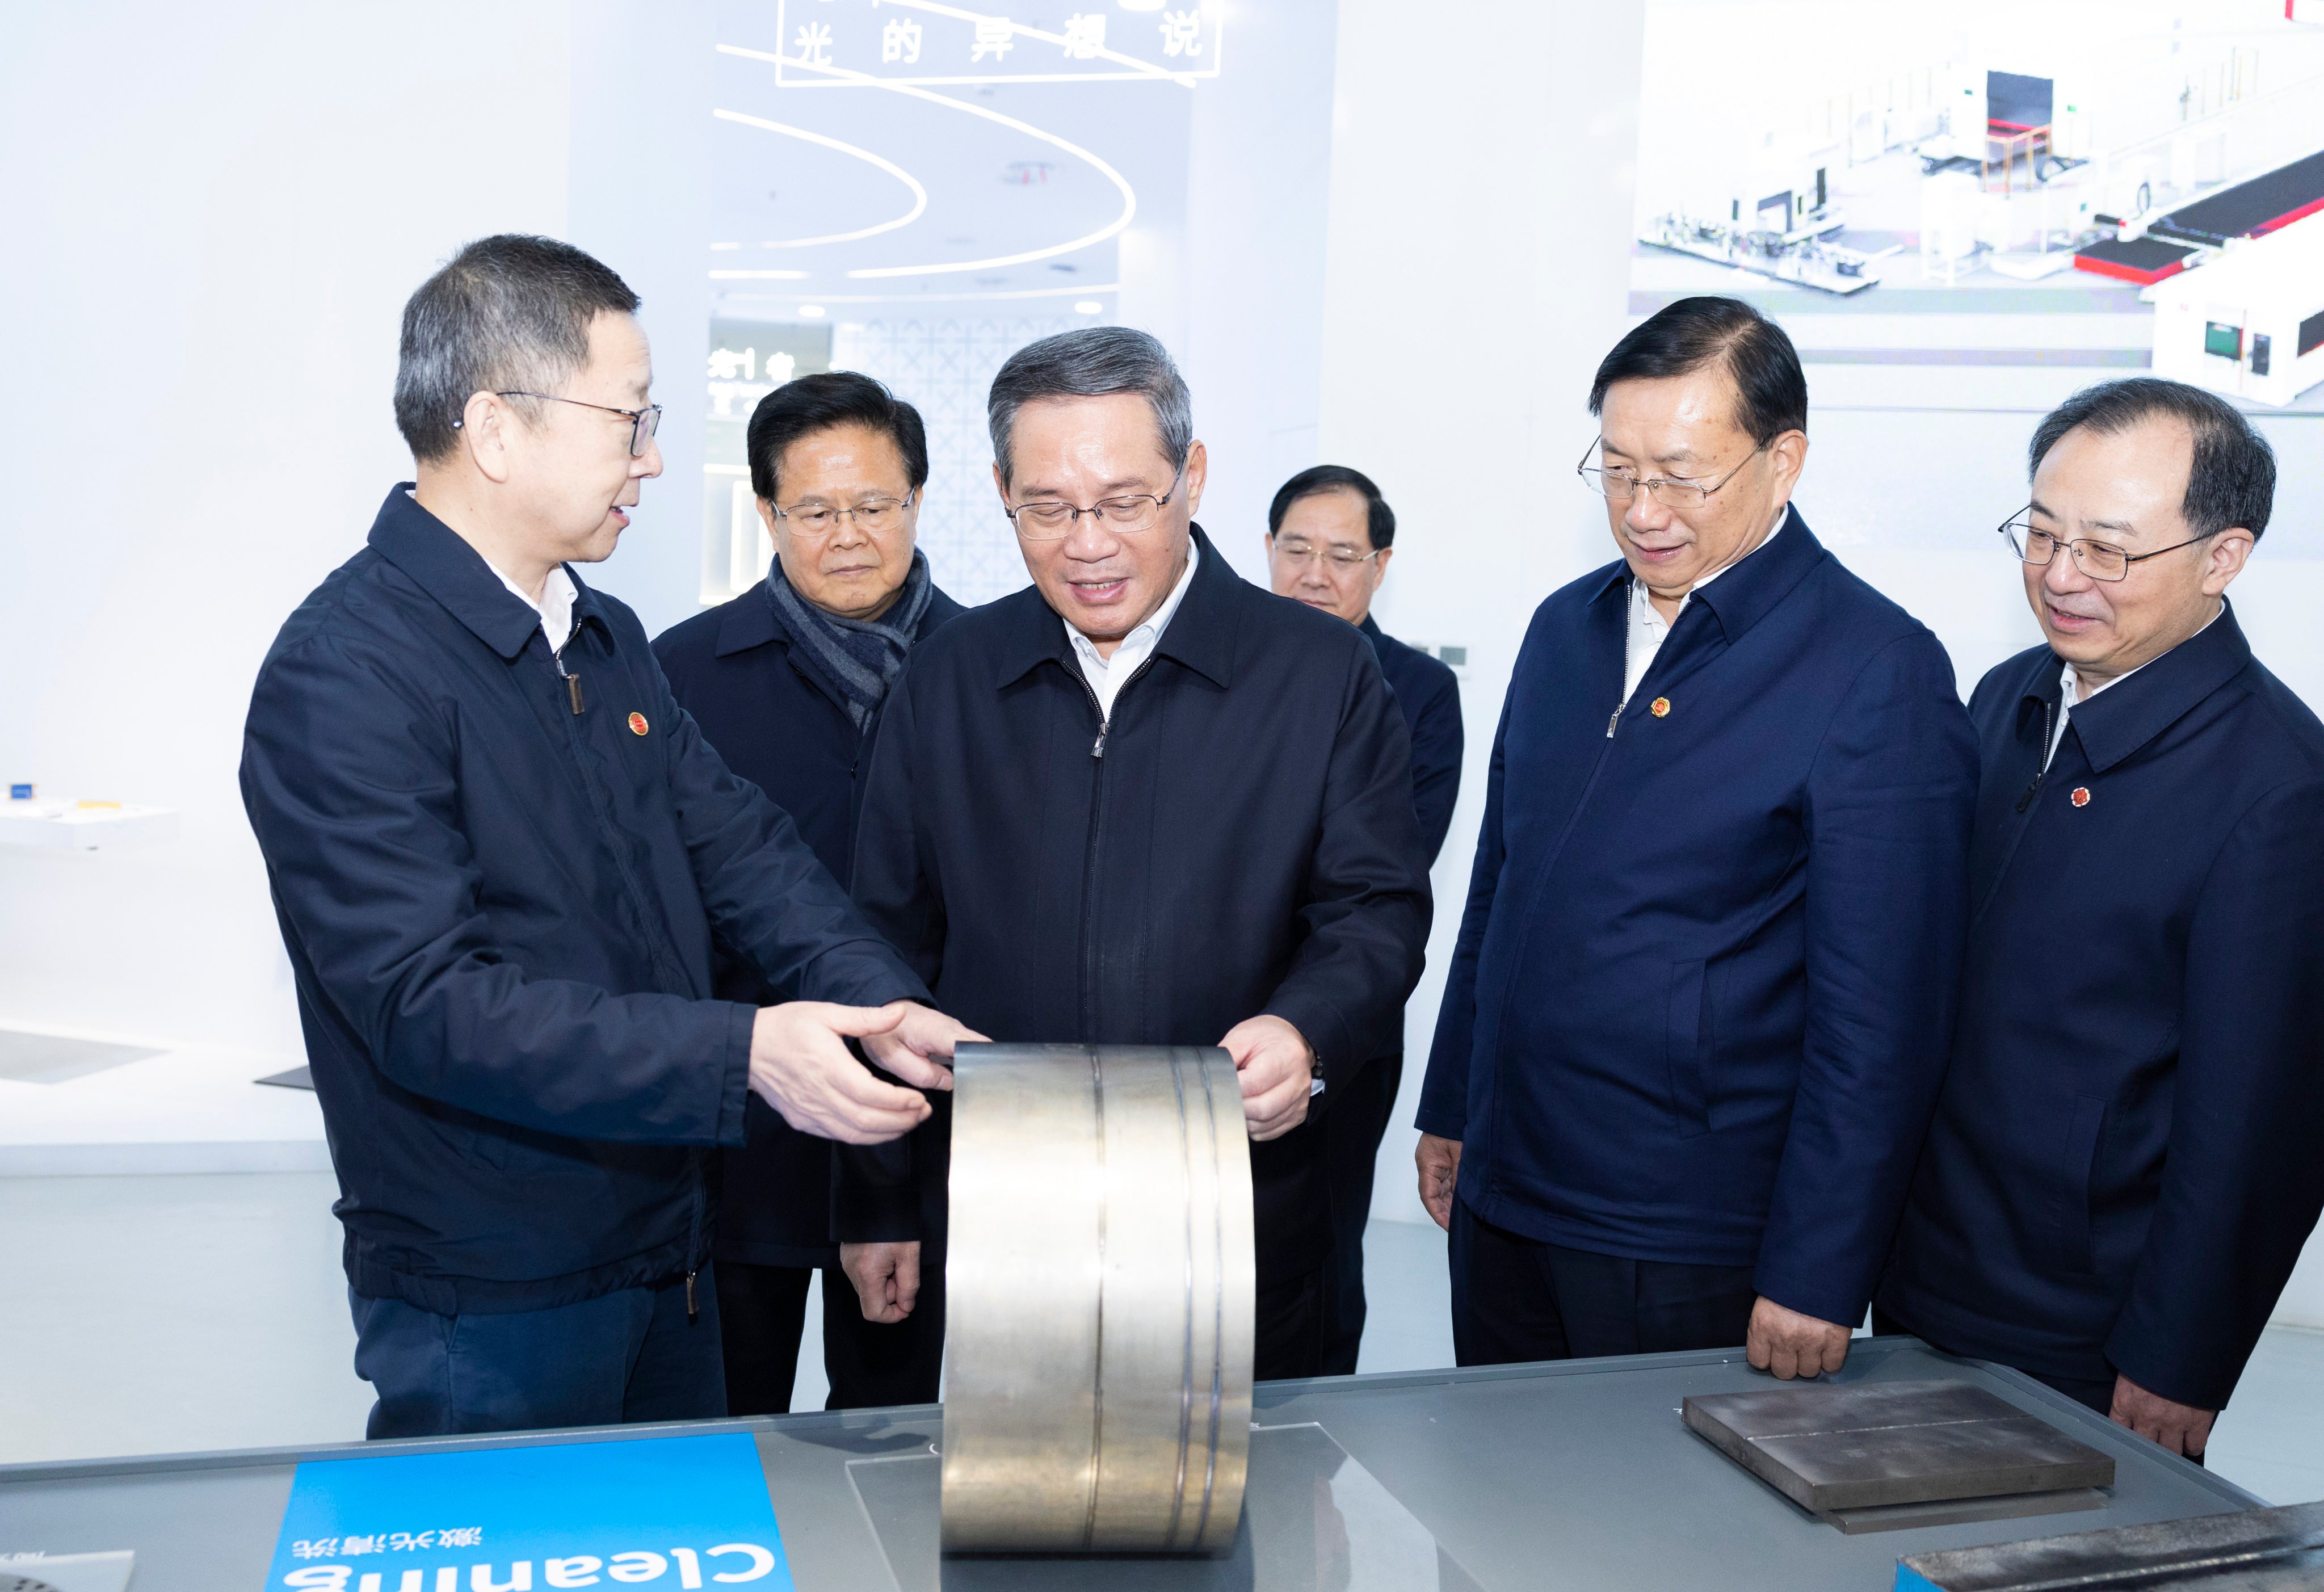 Premier Li Qiang visited a university, as well as semiconductor, laser and chemical manufacturers, during a two-day visit to the central Hubei province this week. Photo: Xinhua